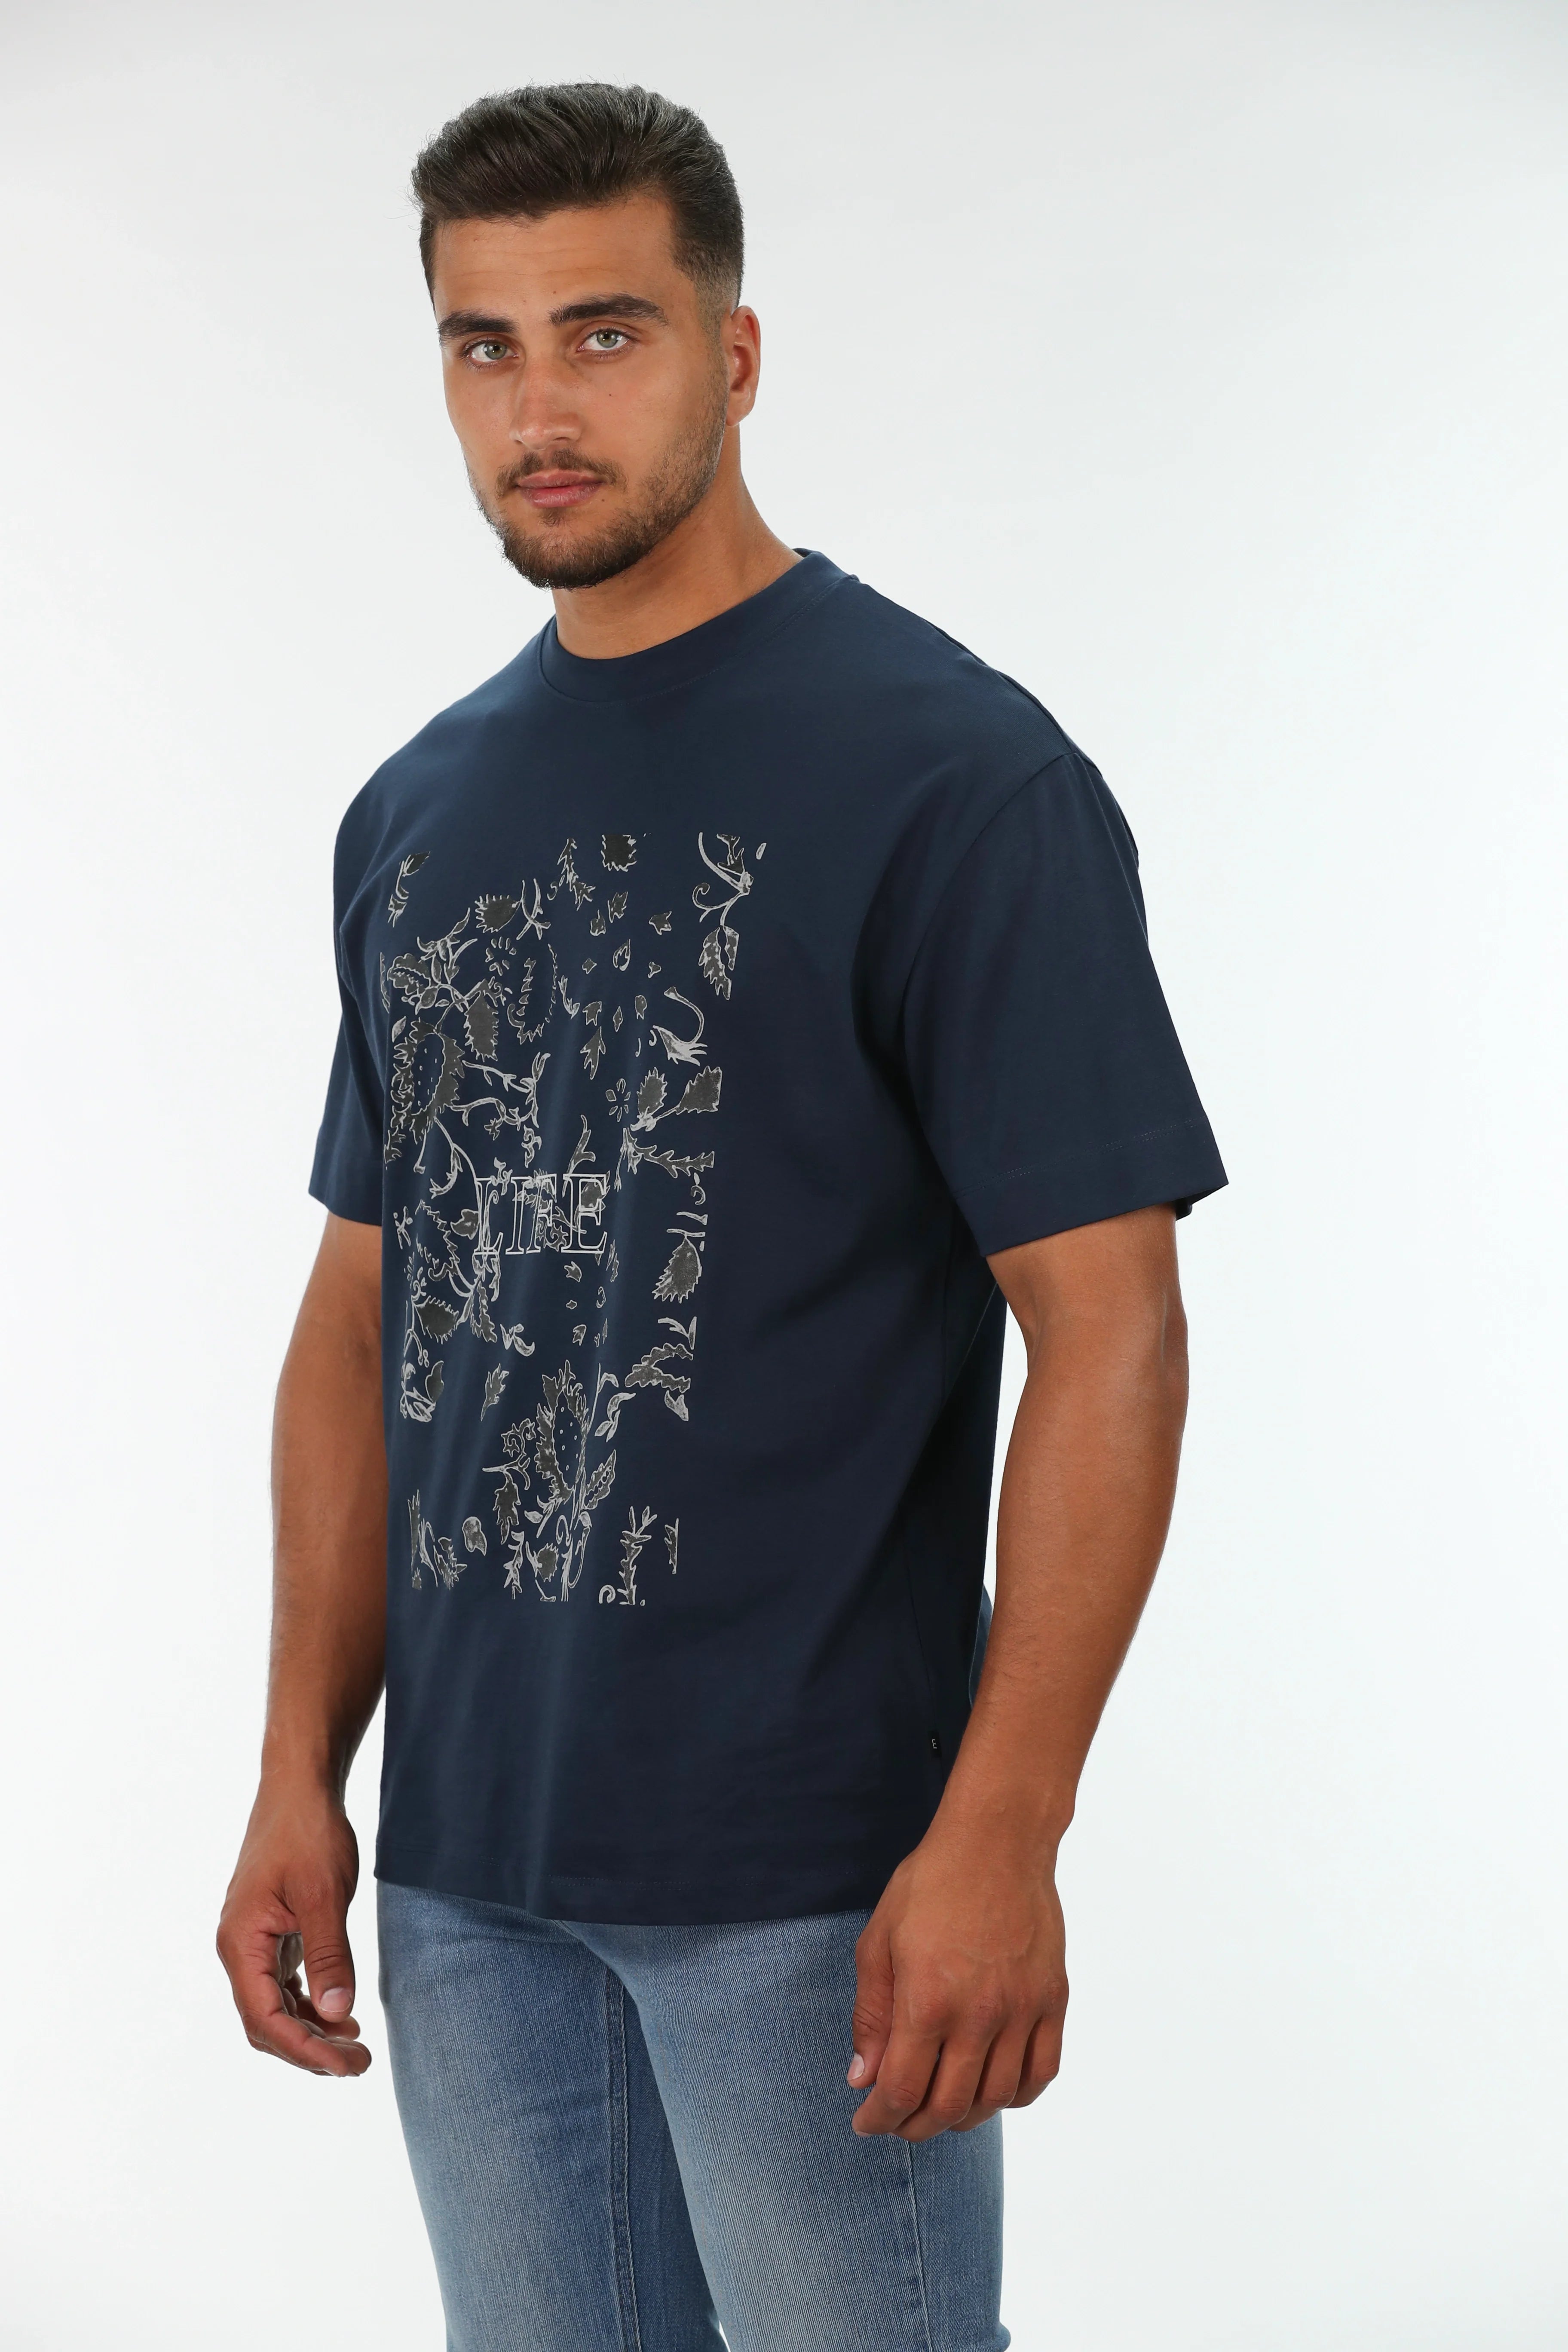 Oversized Navy T-shirt With 'Life' Front Design